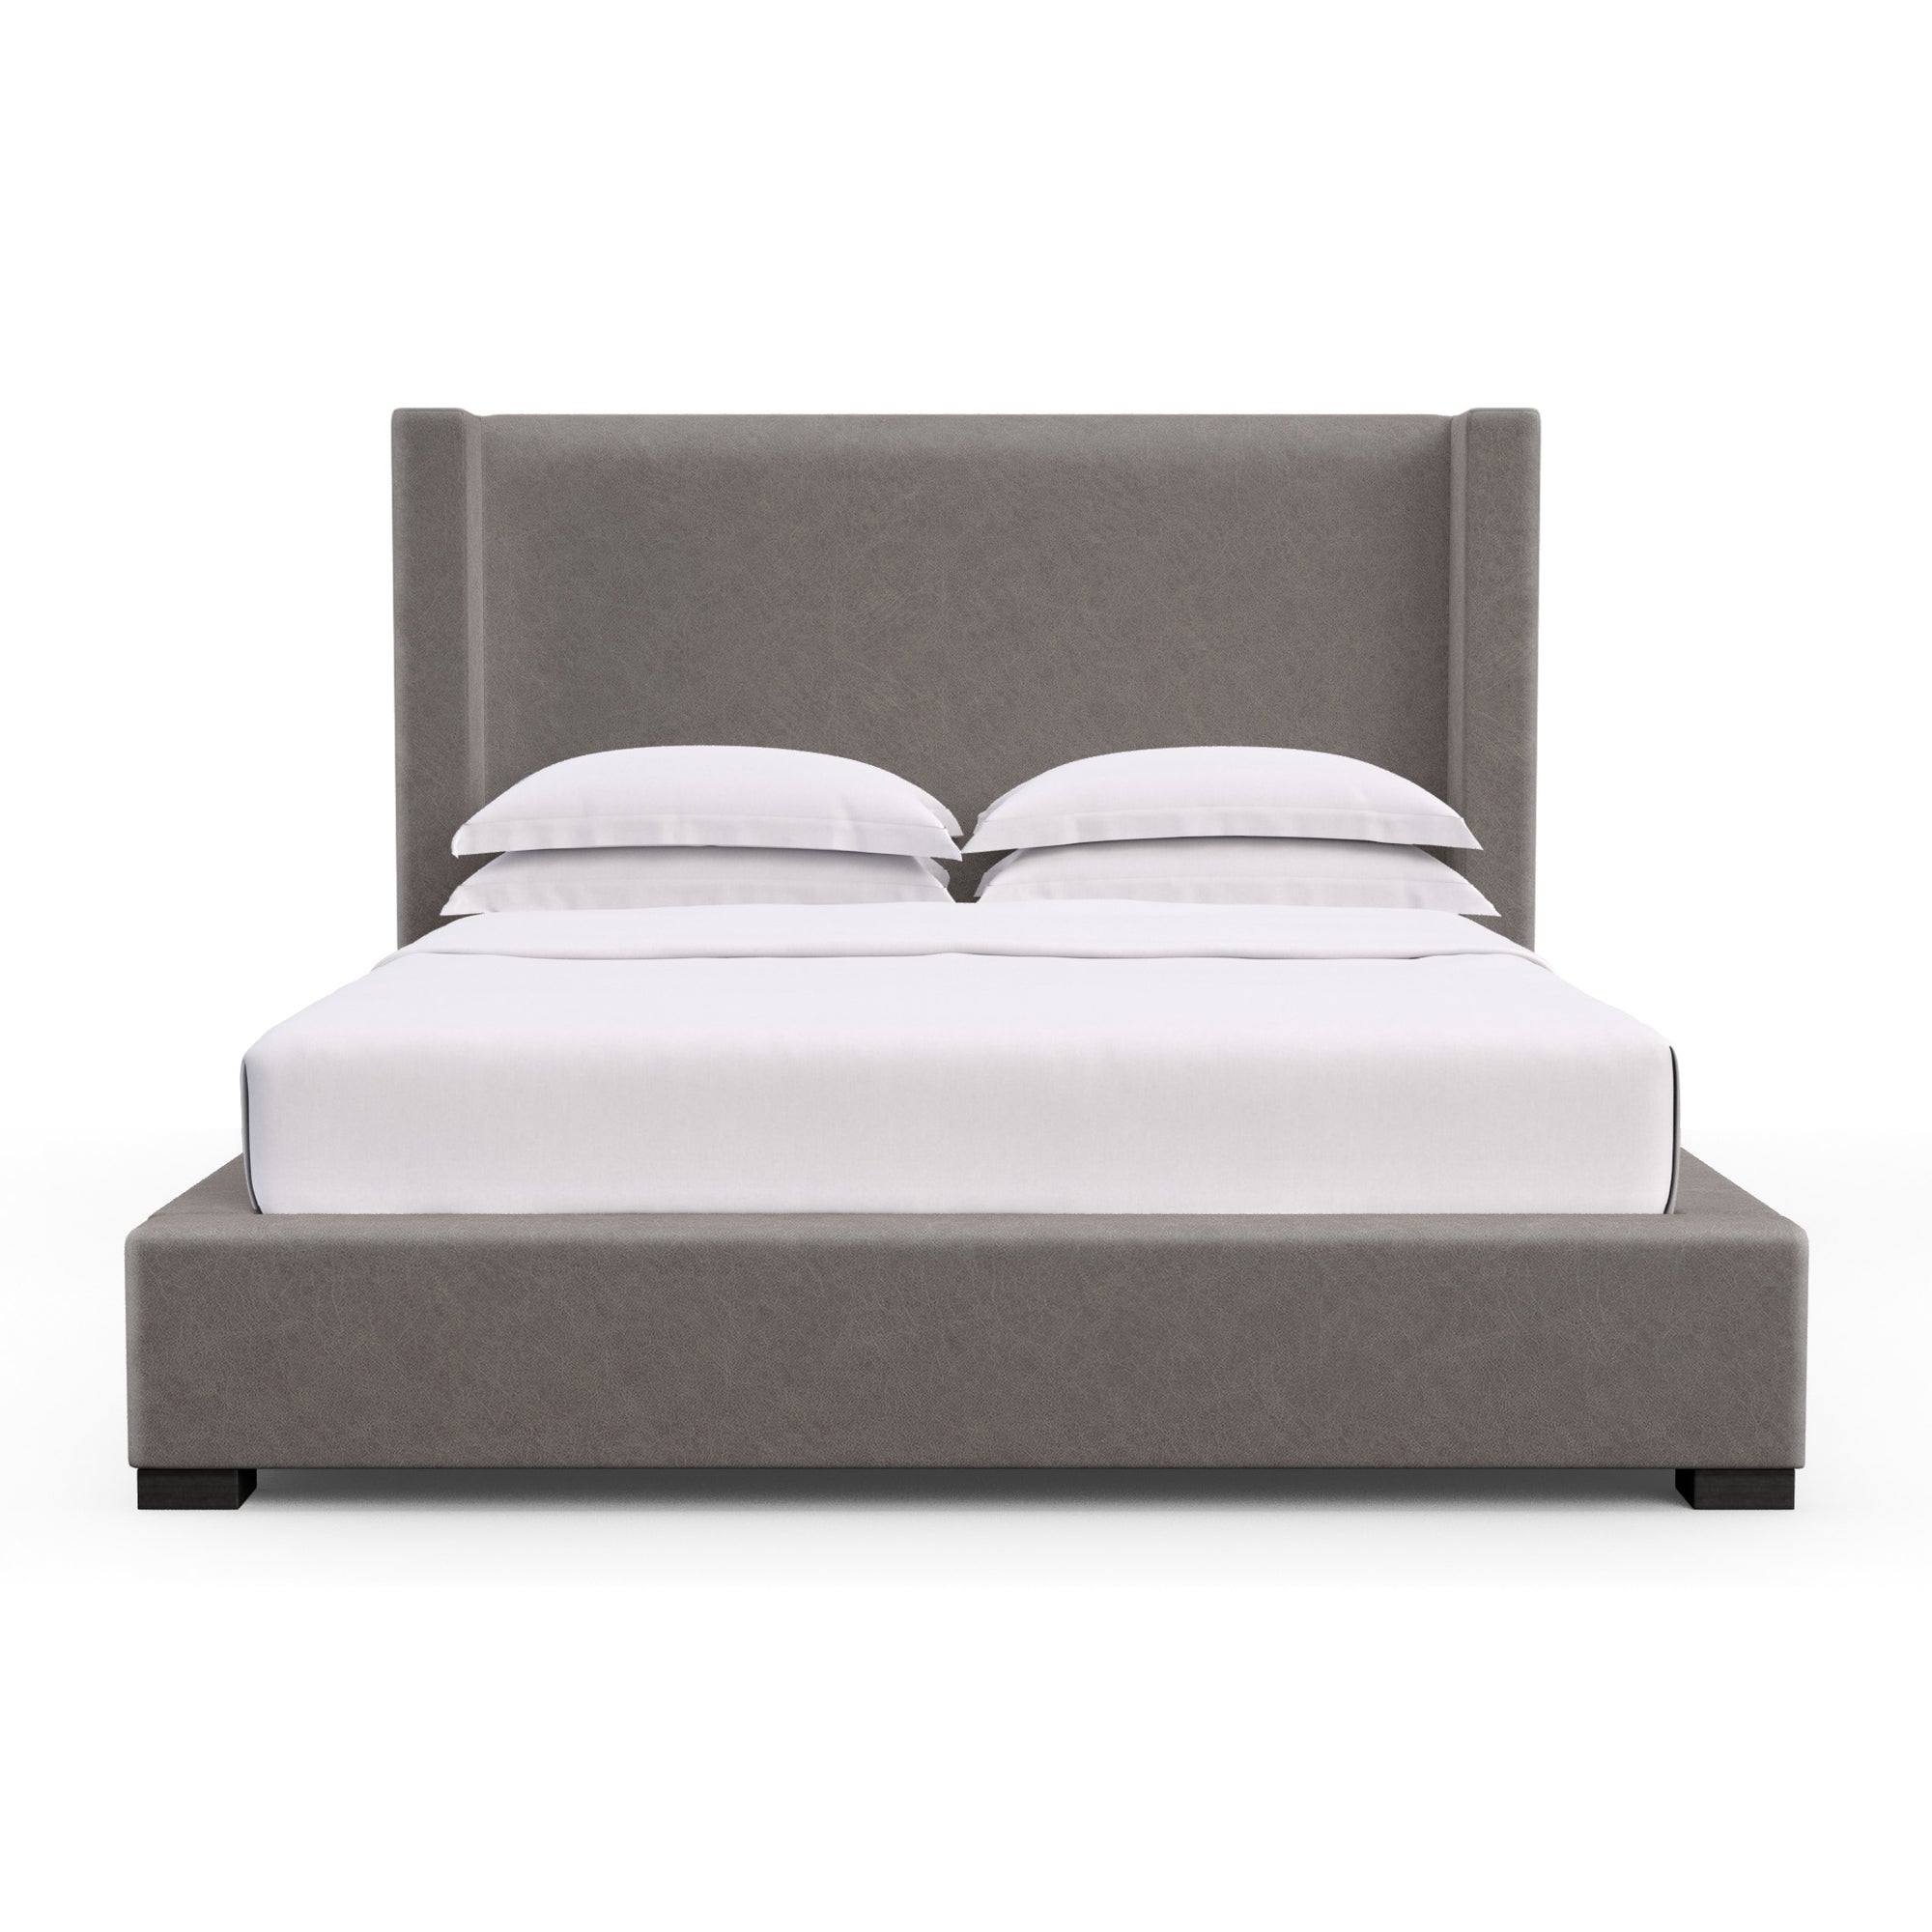 Roxborough Shelter Bed - Graphite Distressed Leather